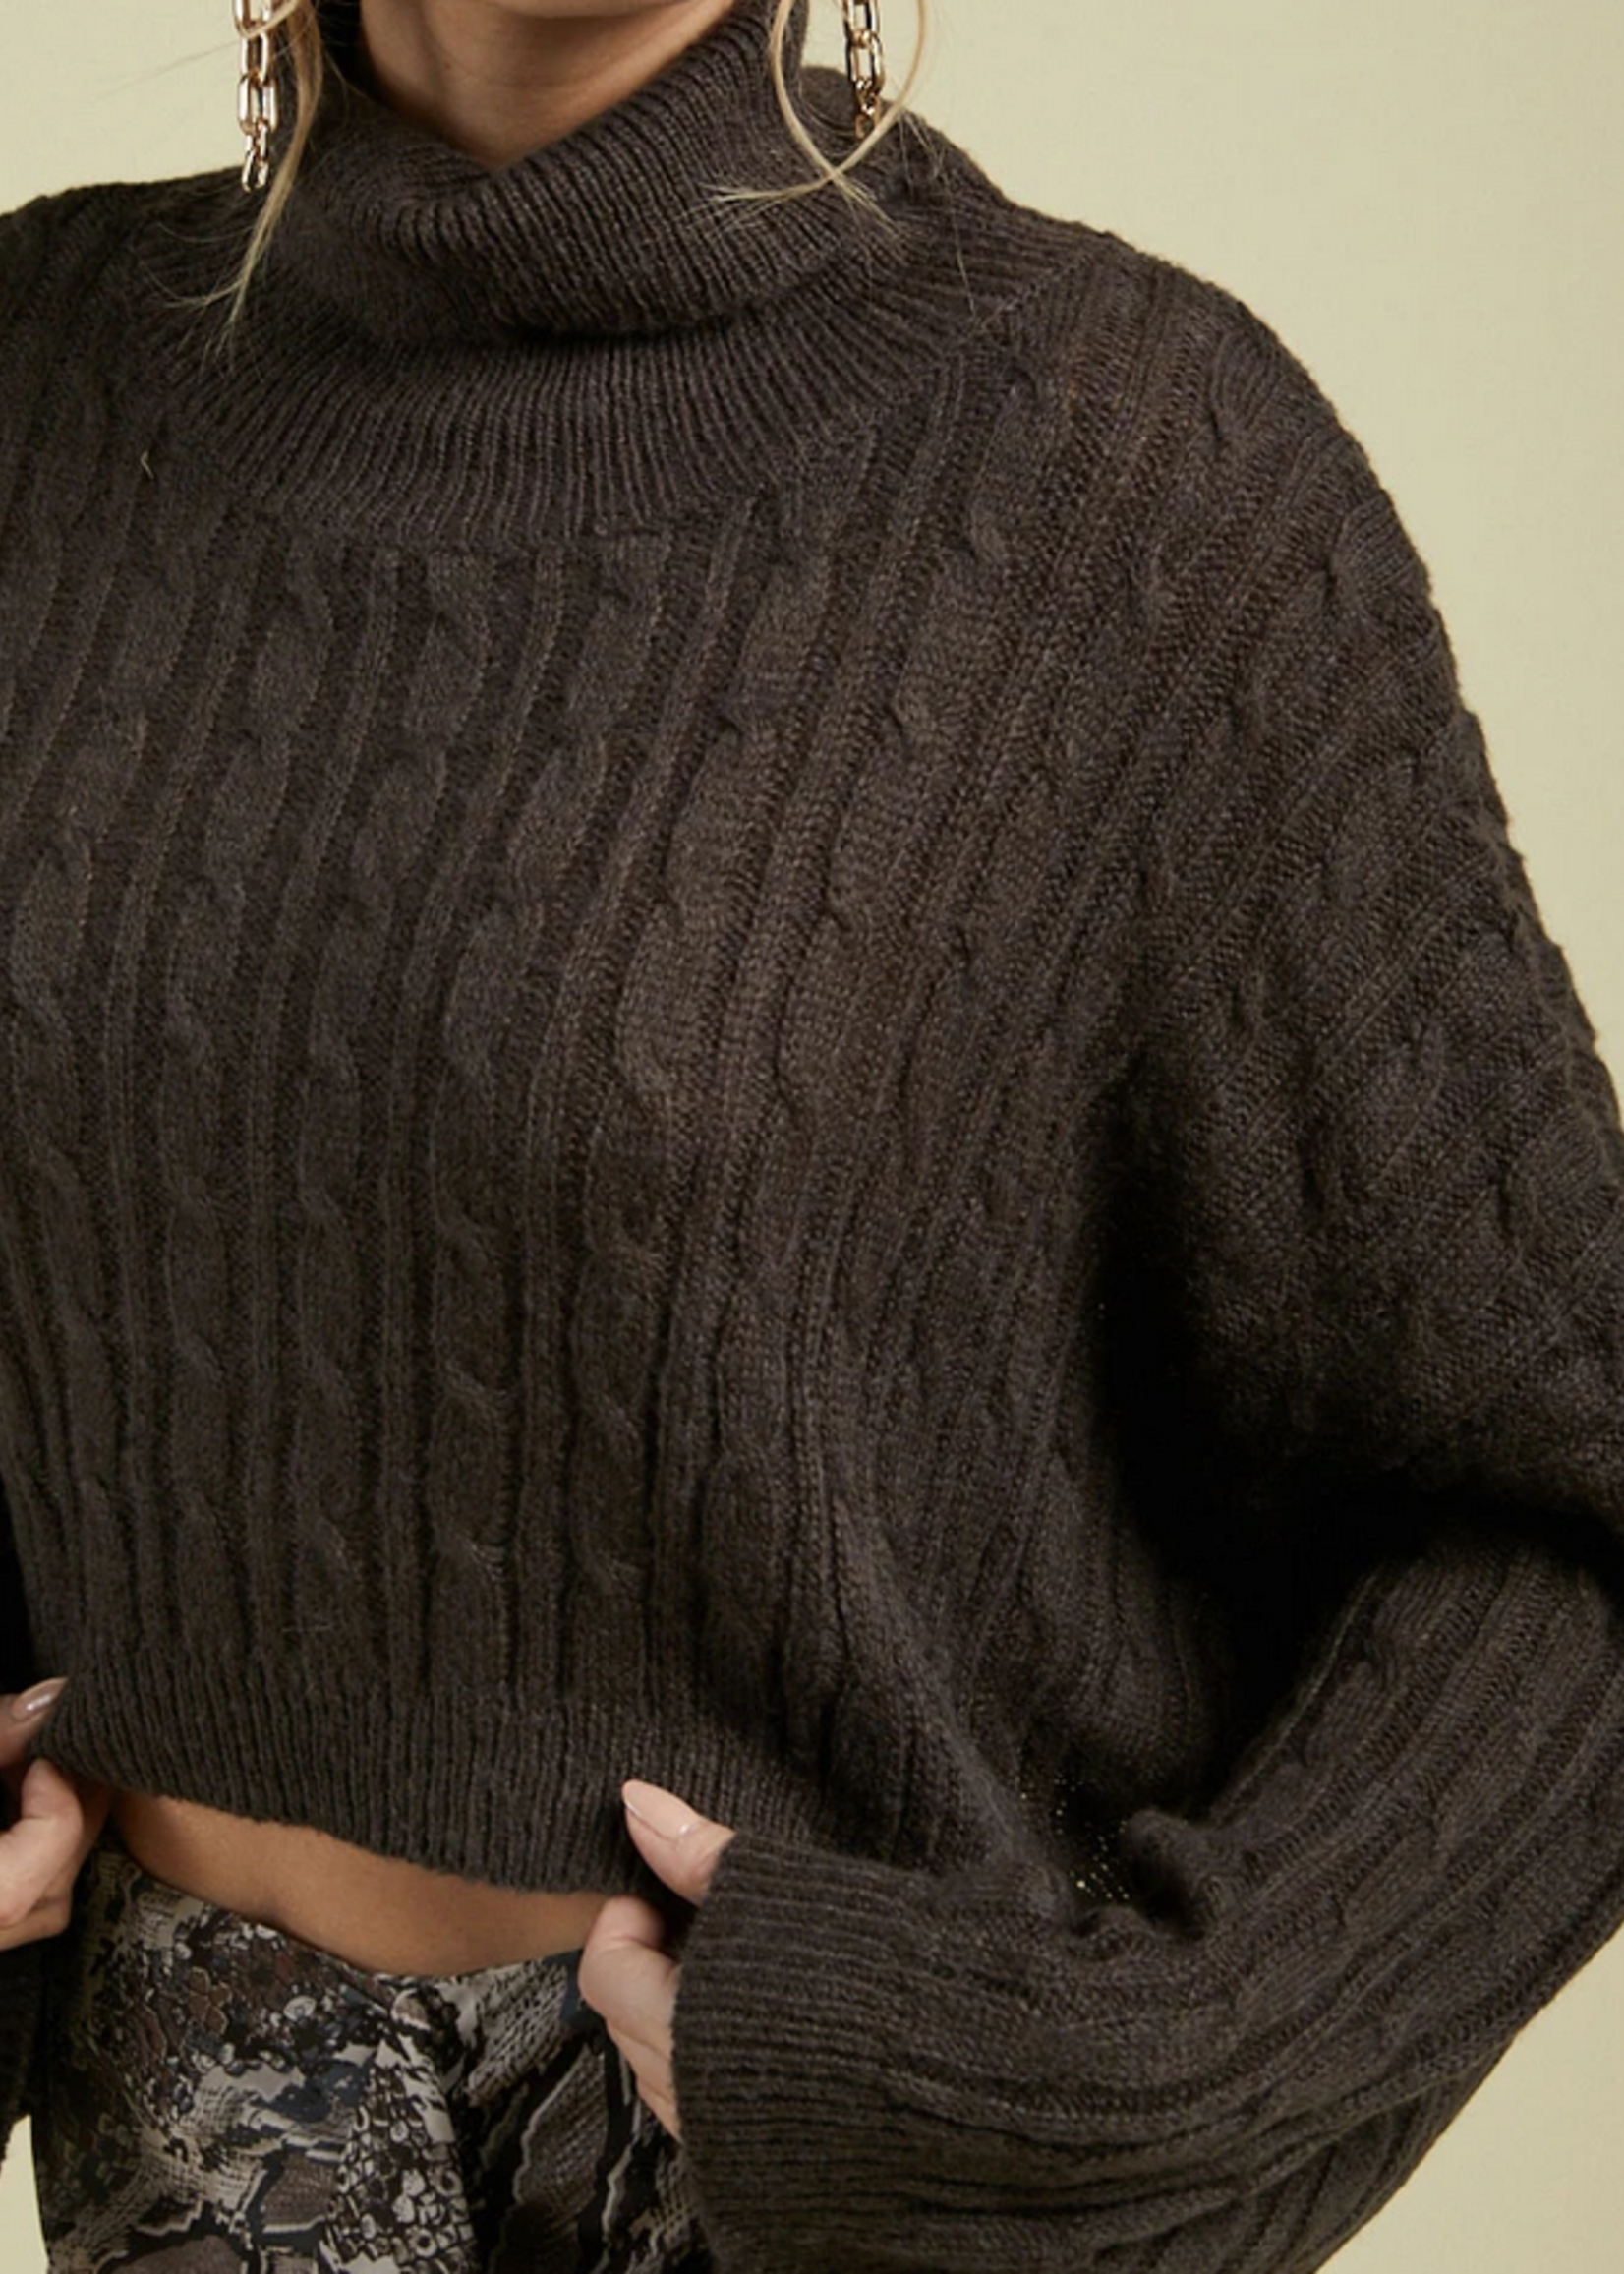 SAGE THE LABEL BAILEY TURTLENECK SWEATER